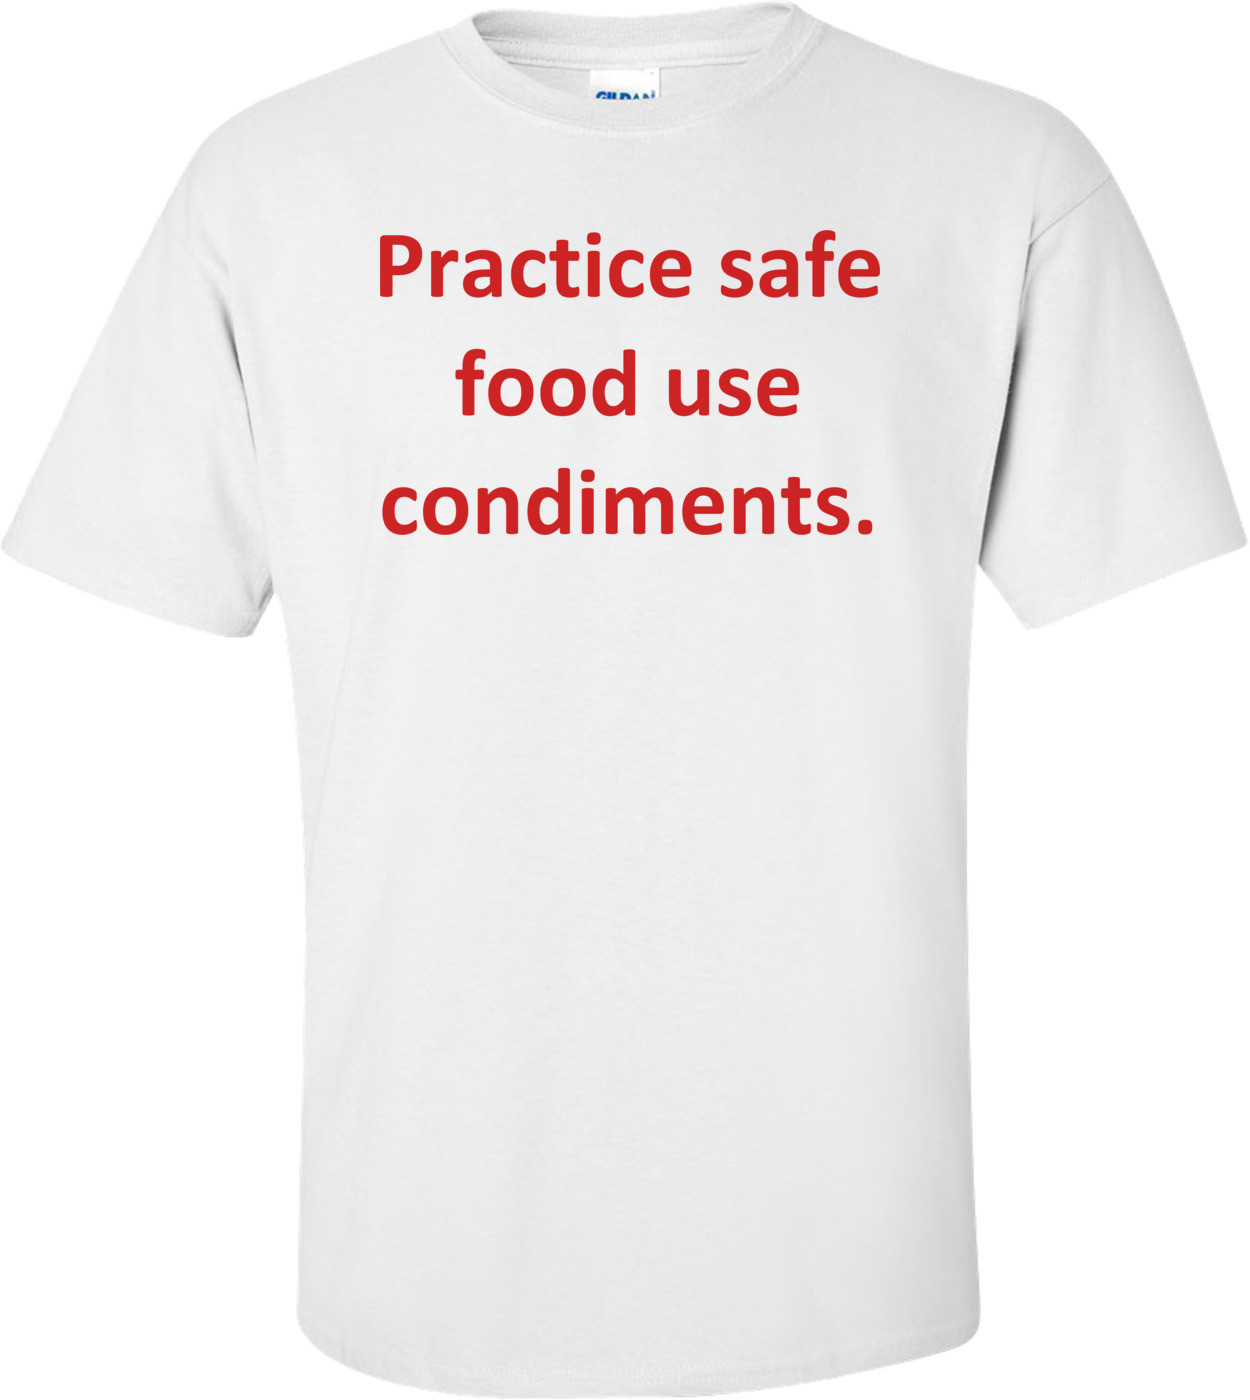 Practice safe food use condiments. Shirt